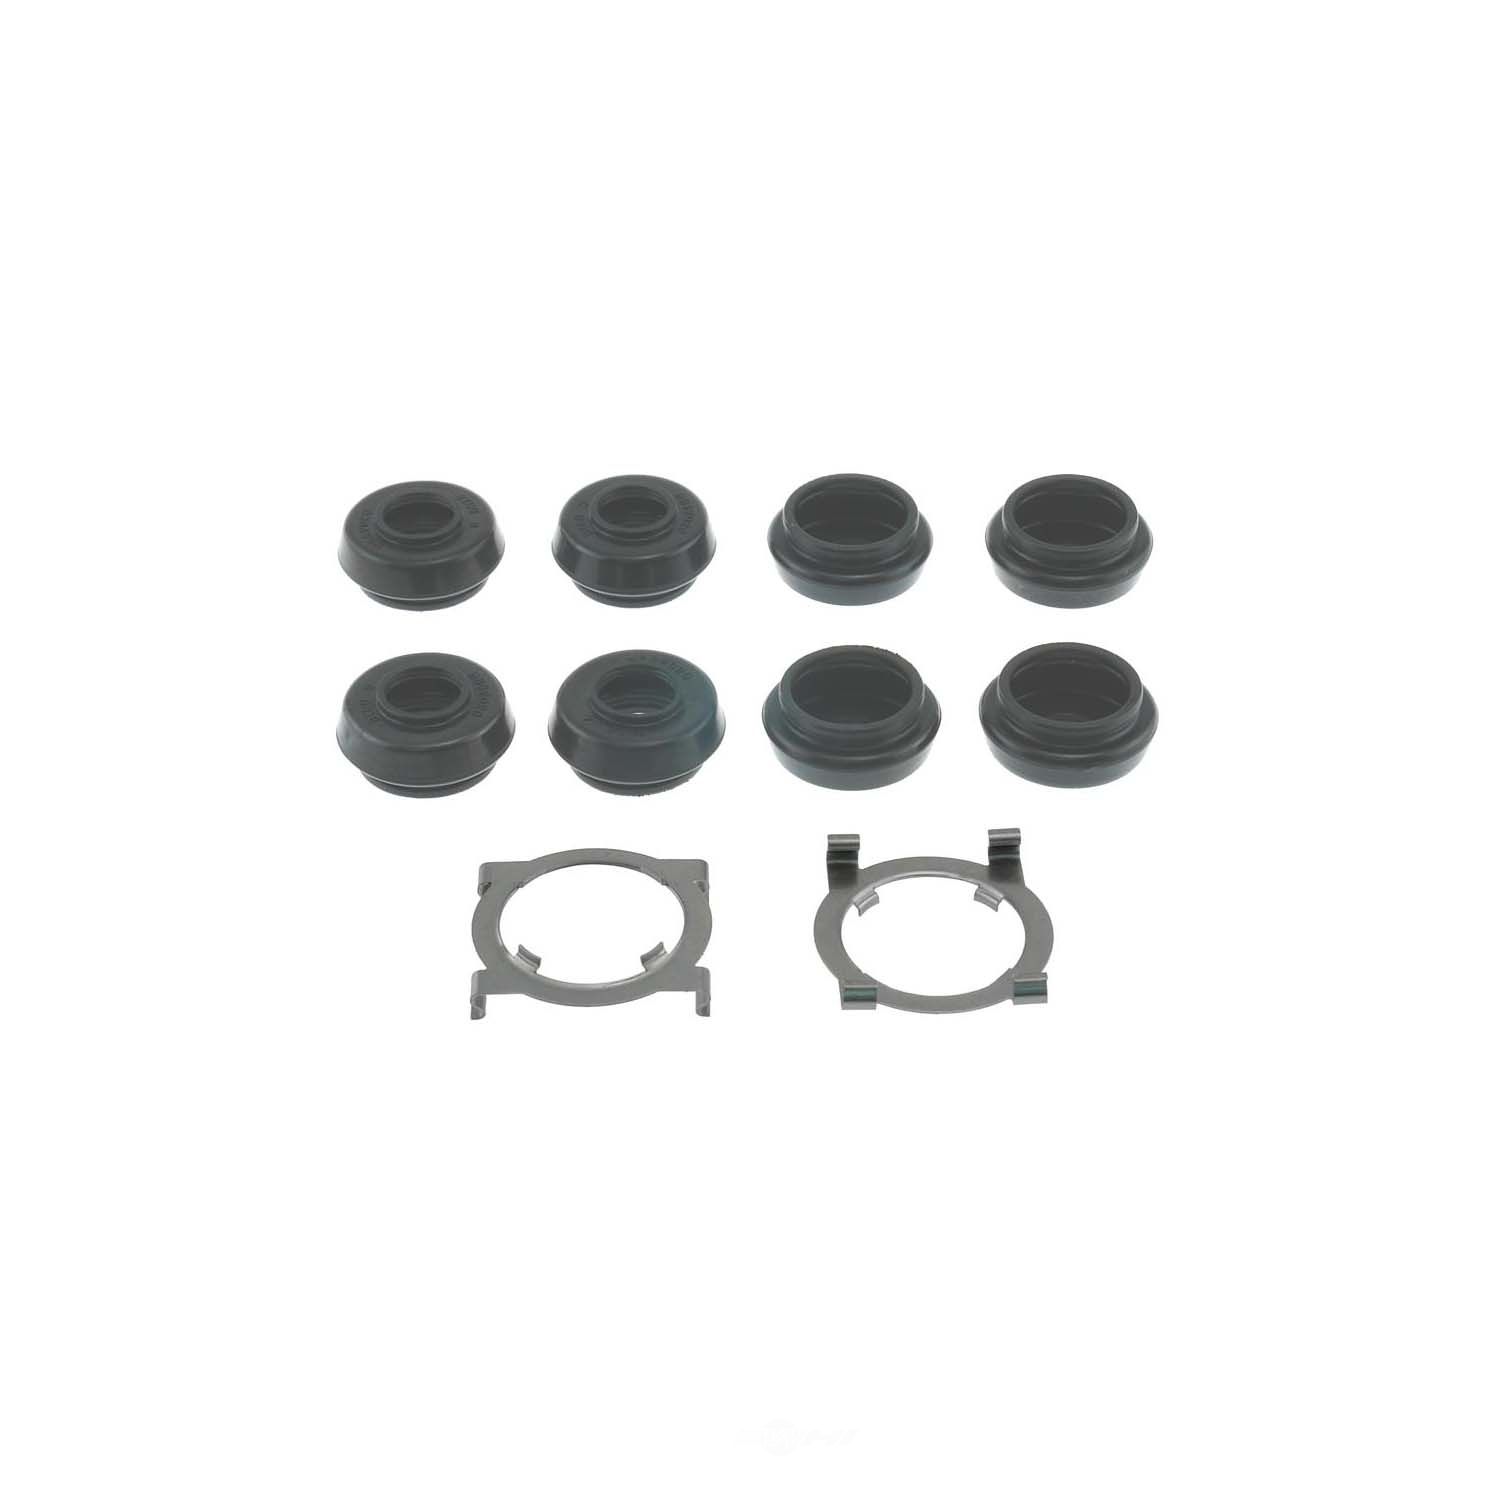 CARLSON QUALITY BRAKE PARTS - Includes Clips & Bushings (Rear) - CRL H5587